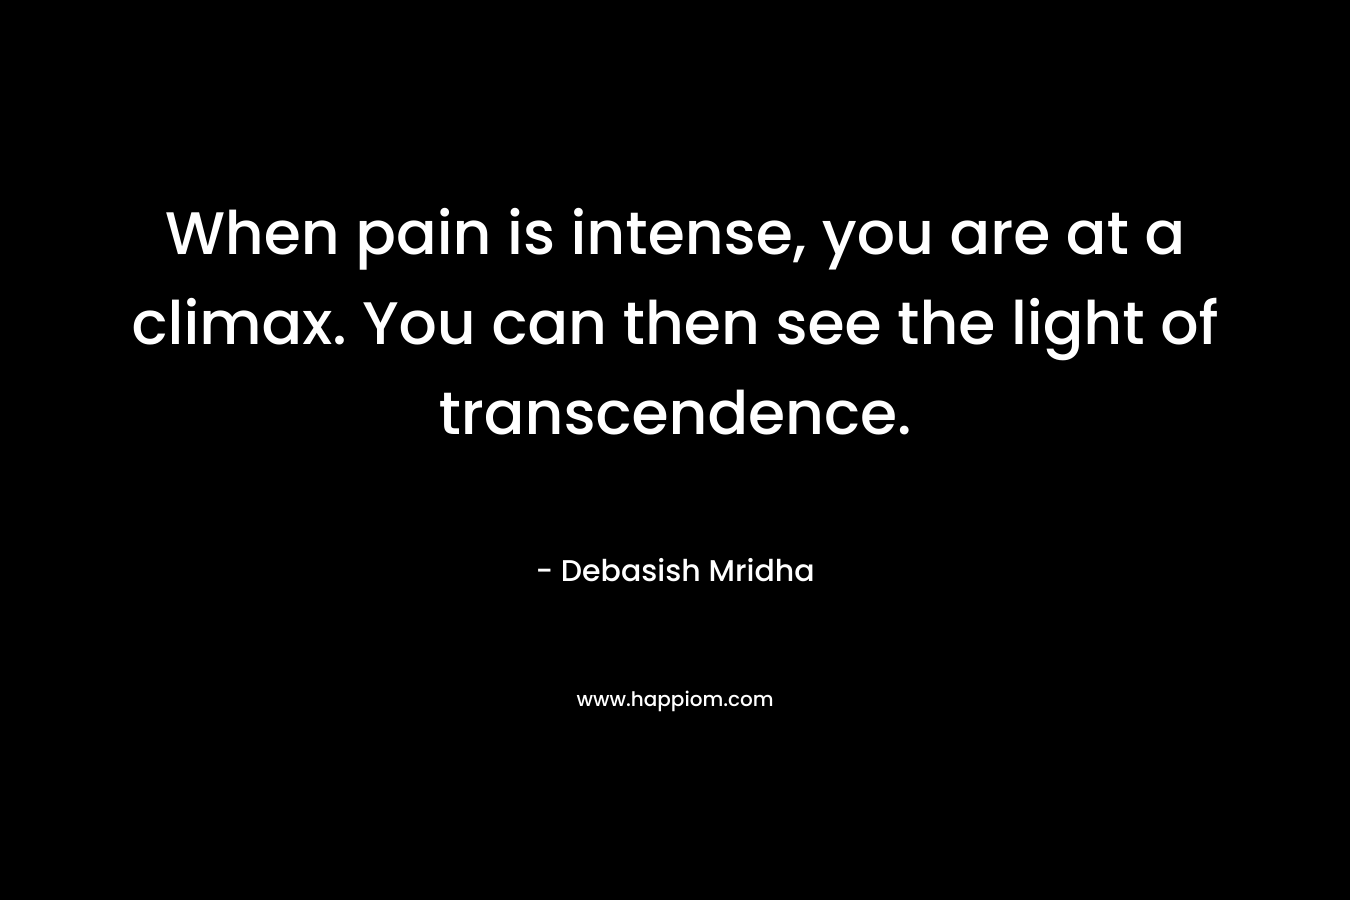 When pain is intense, you are at a climax. You can then see the light of transcendence. – Debasish Mridha